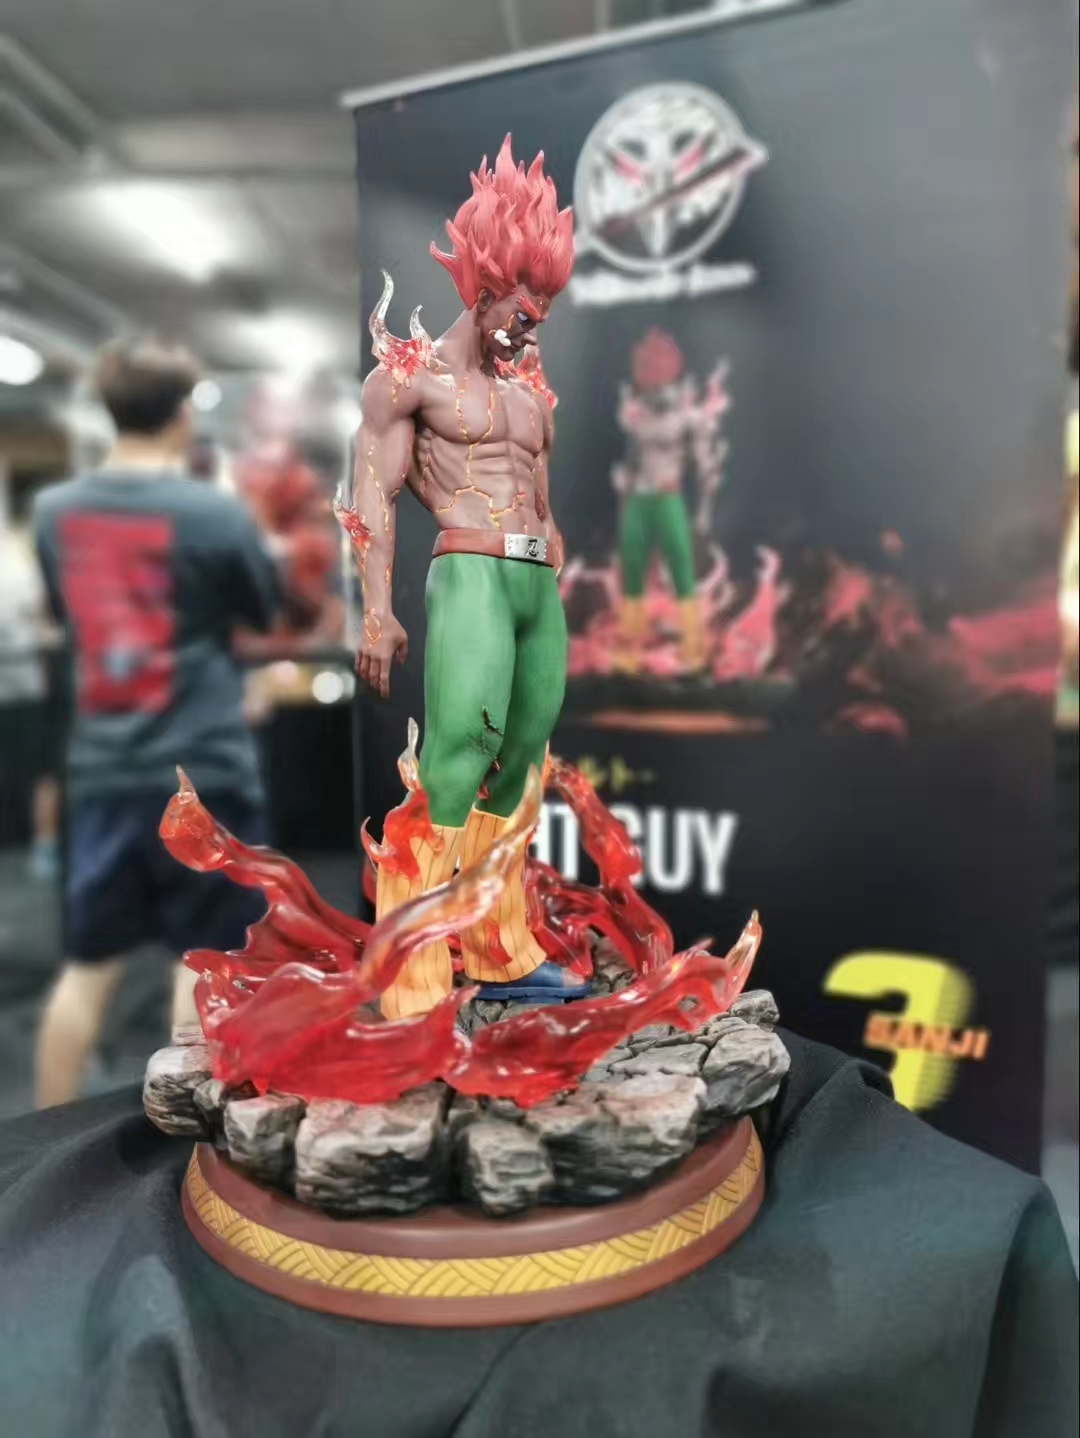 JZ Studio GK NARUTO Might Guy 1/7 Scale GK Collector Resin Statue Limit in stock